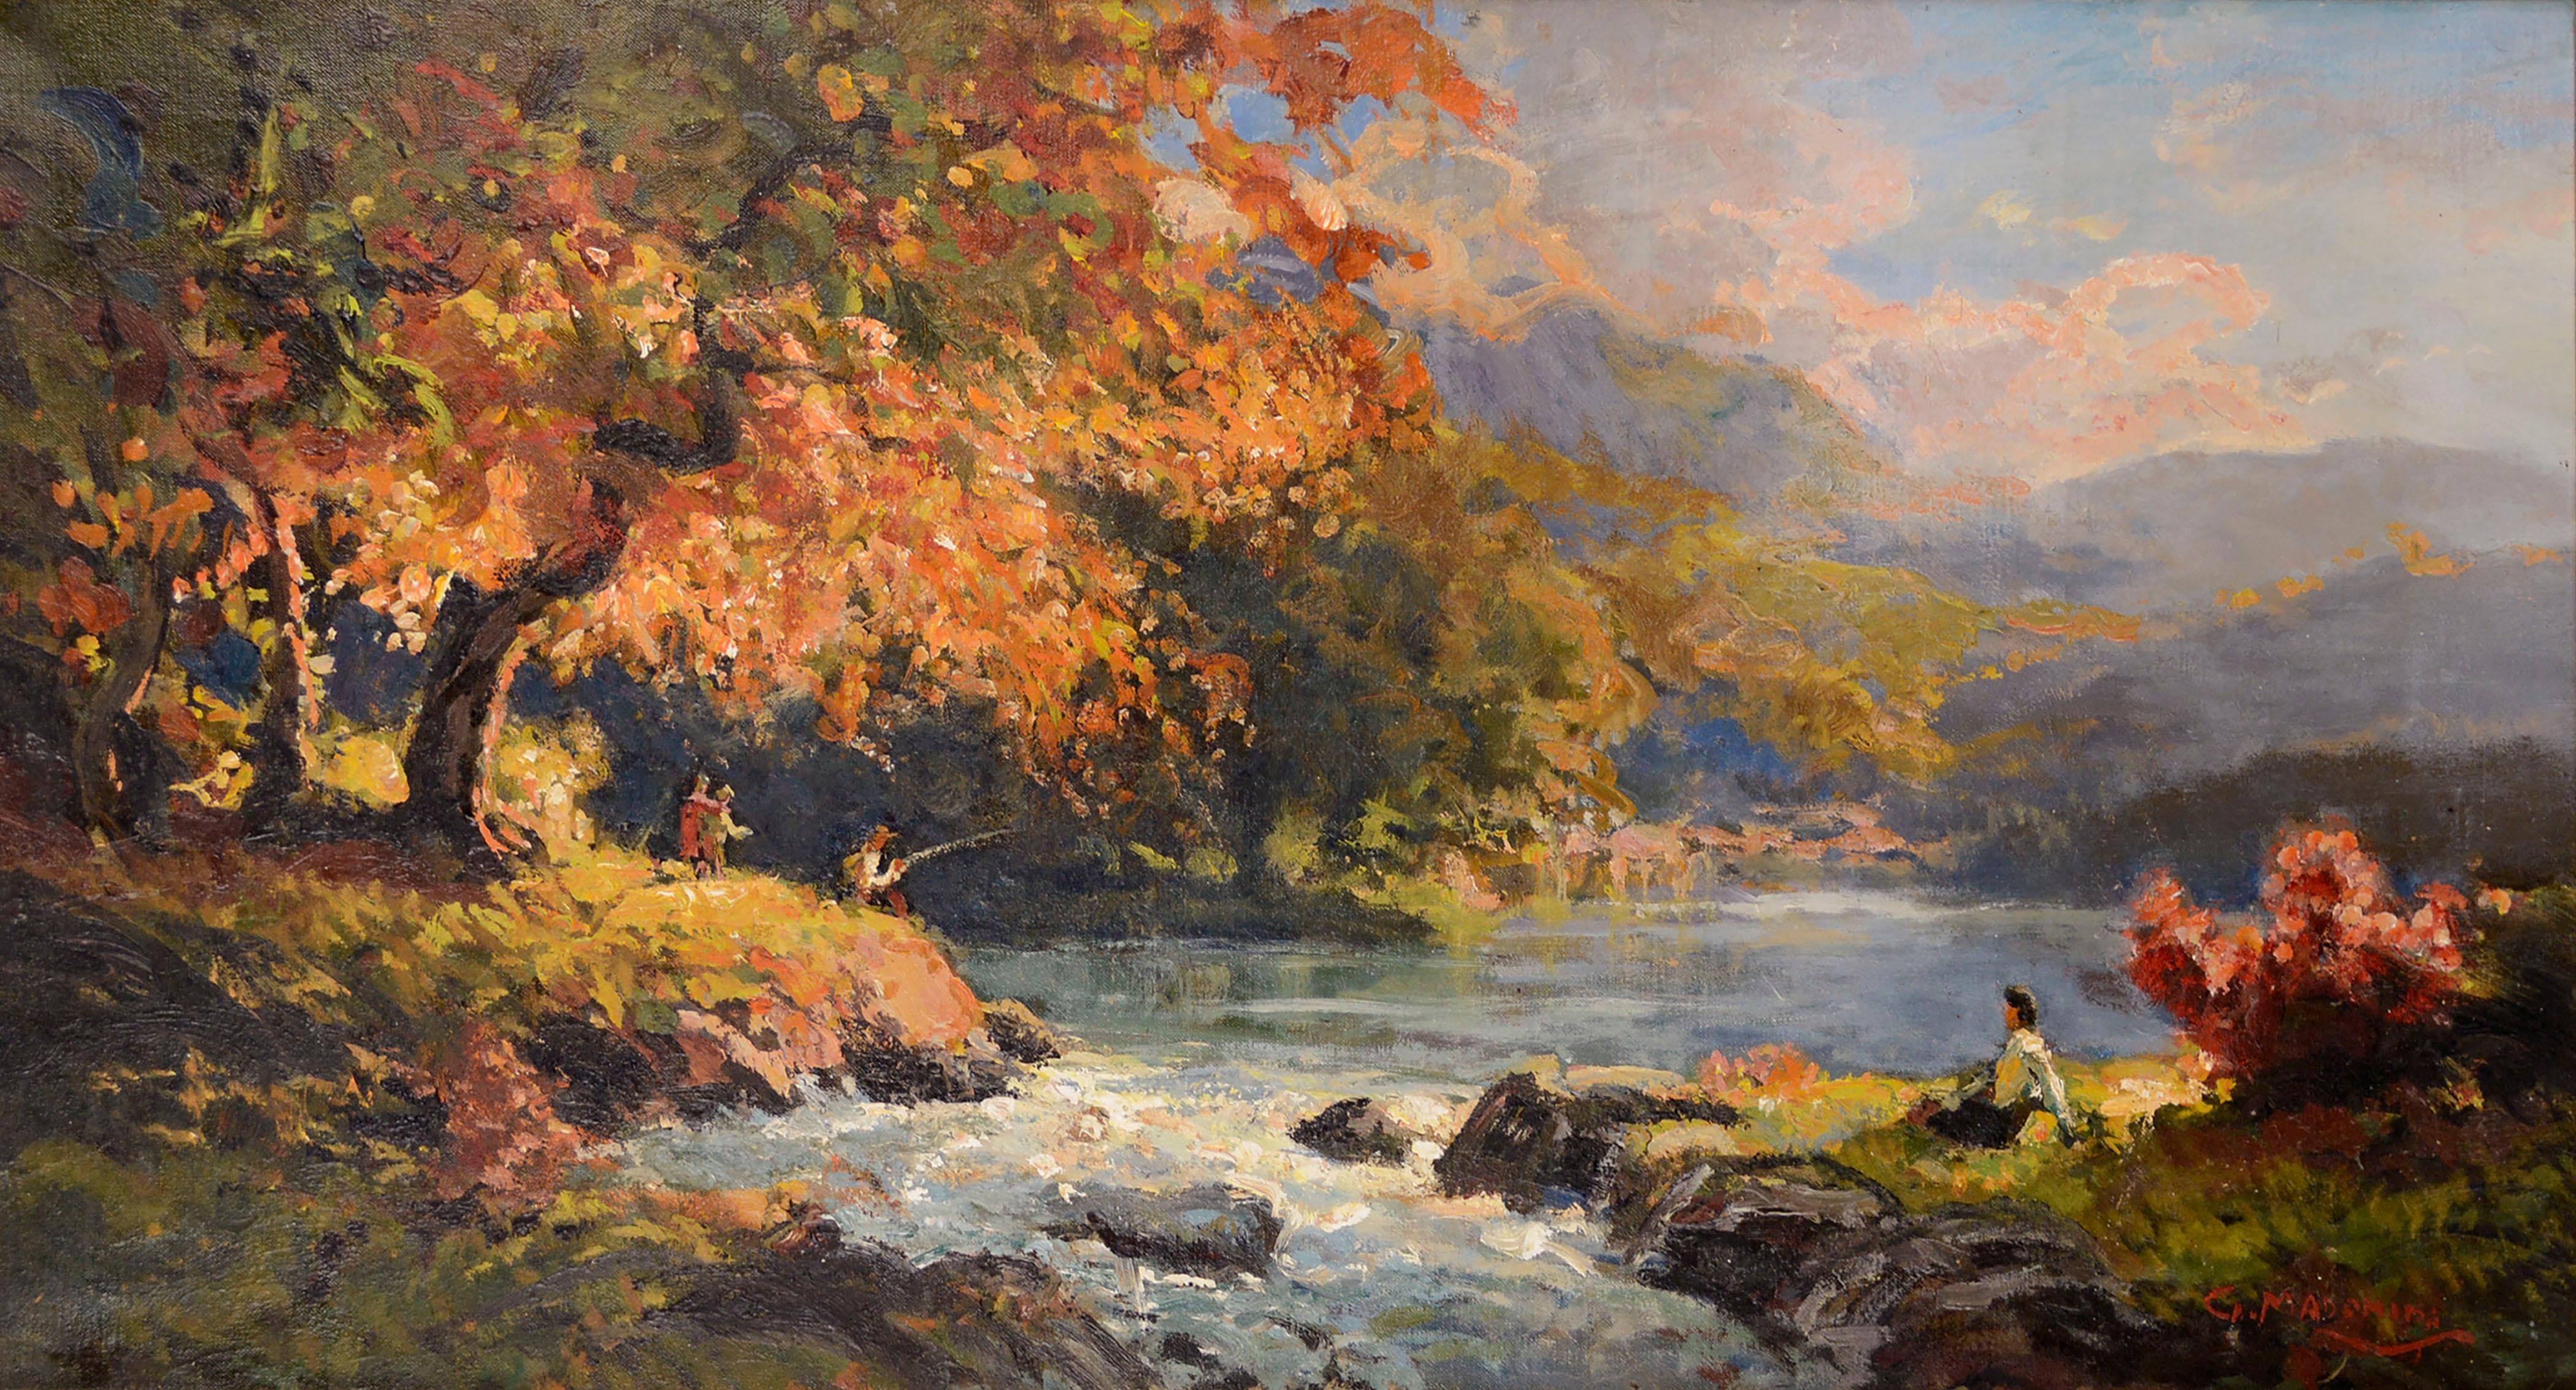 Autumn Day on the River - Figurative Landscape  - Painting by Giovanni Madonini 